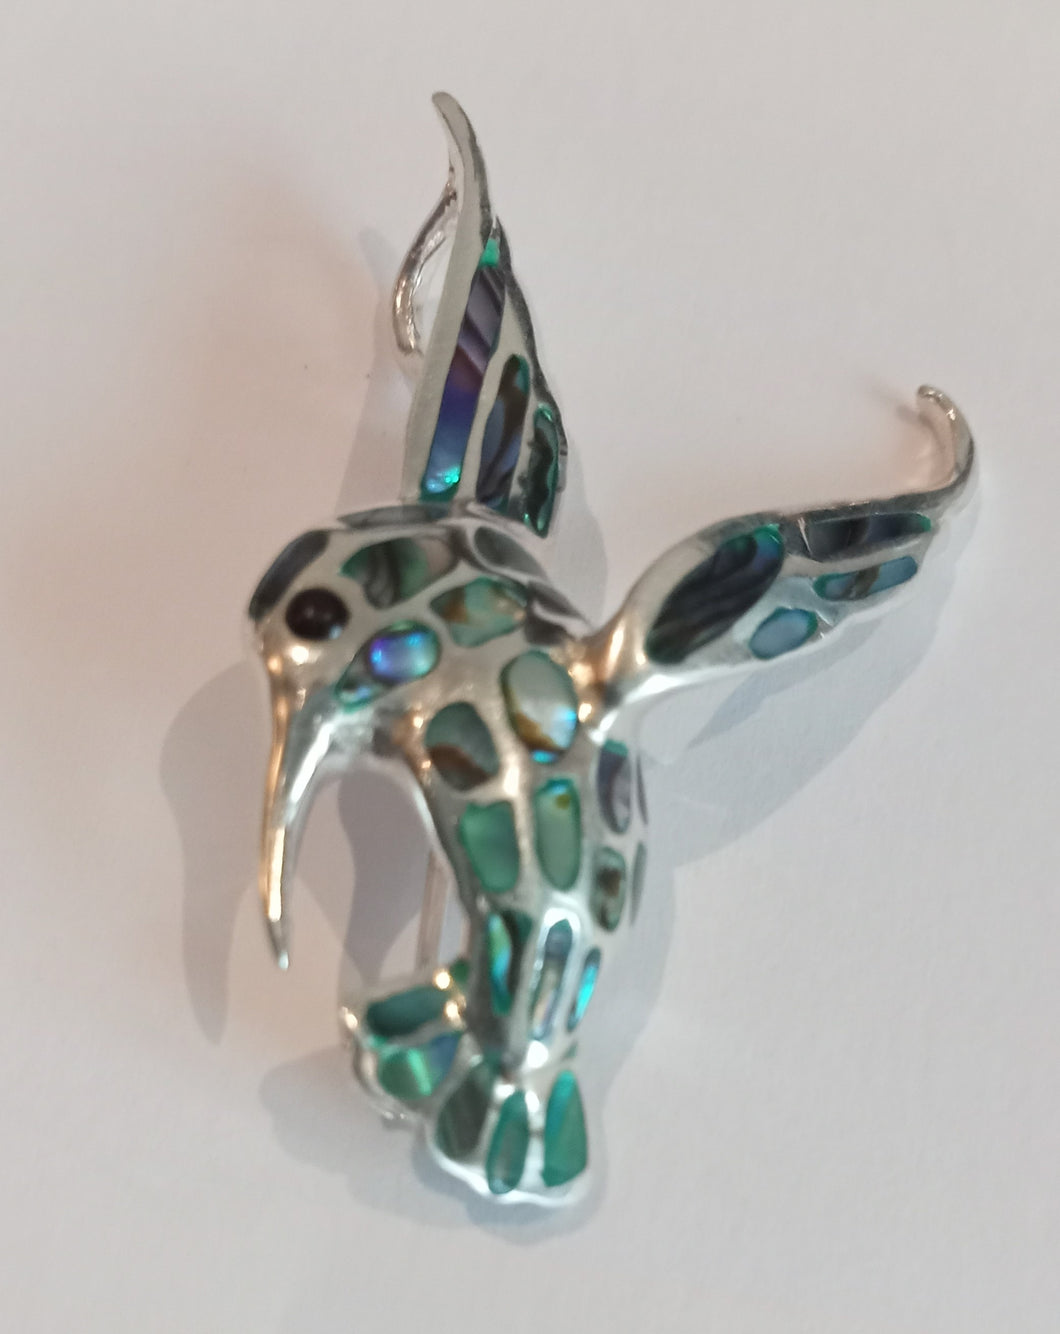 Humming Bird made from Abalone Shell and Silver Broach